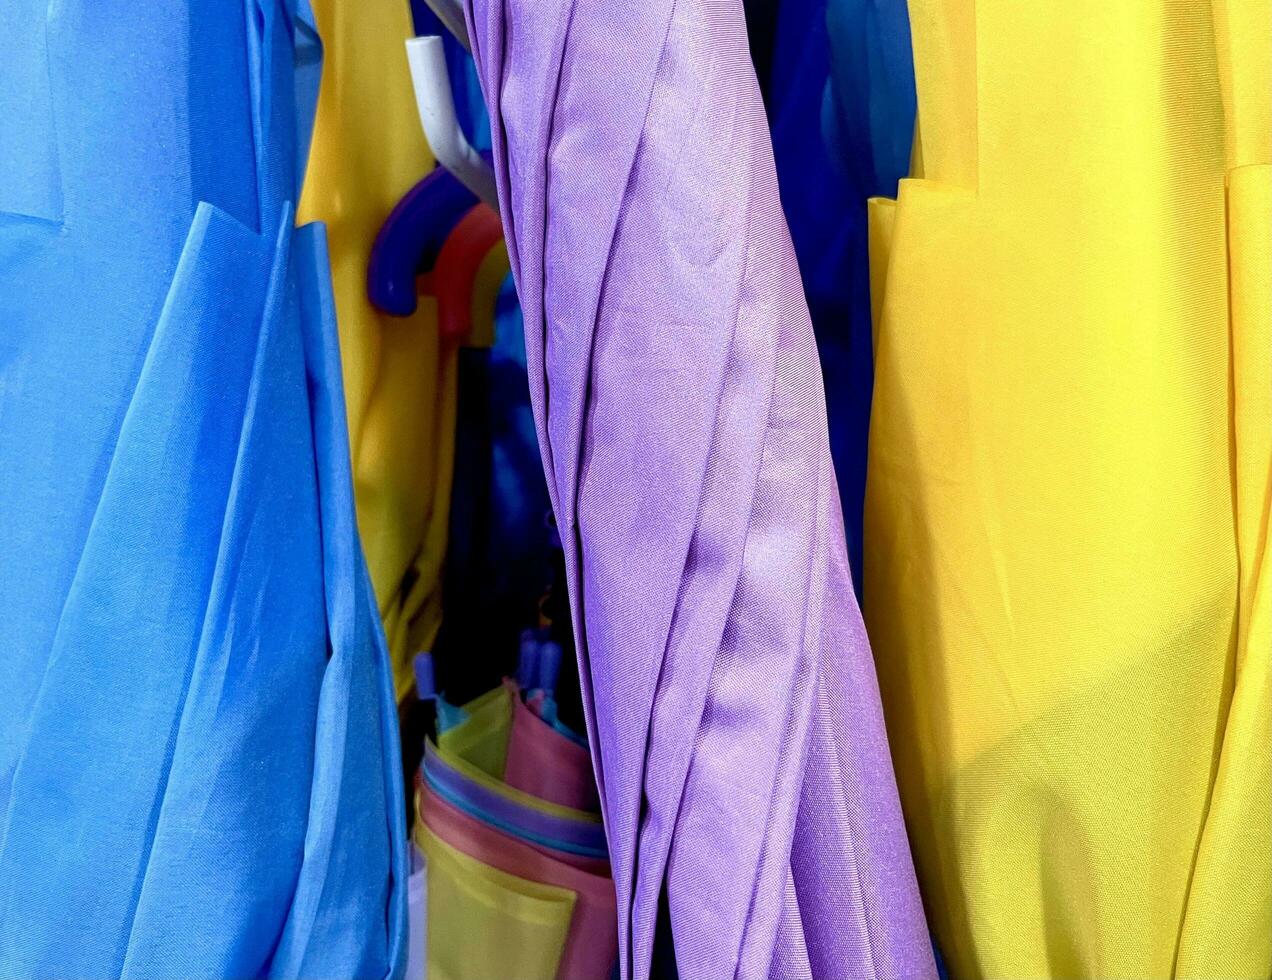 Vibrant blue, purple, and yellow closed umbrella roll in store isolated on horizontal photography ratio photo